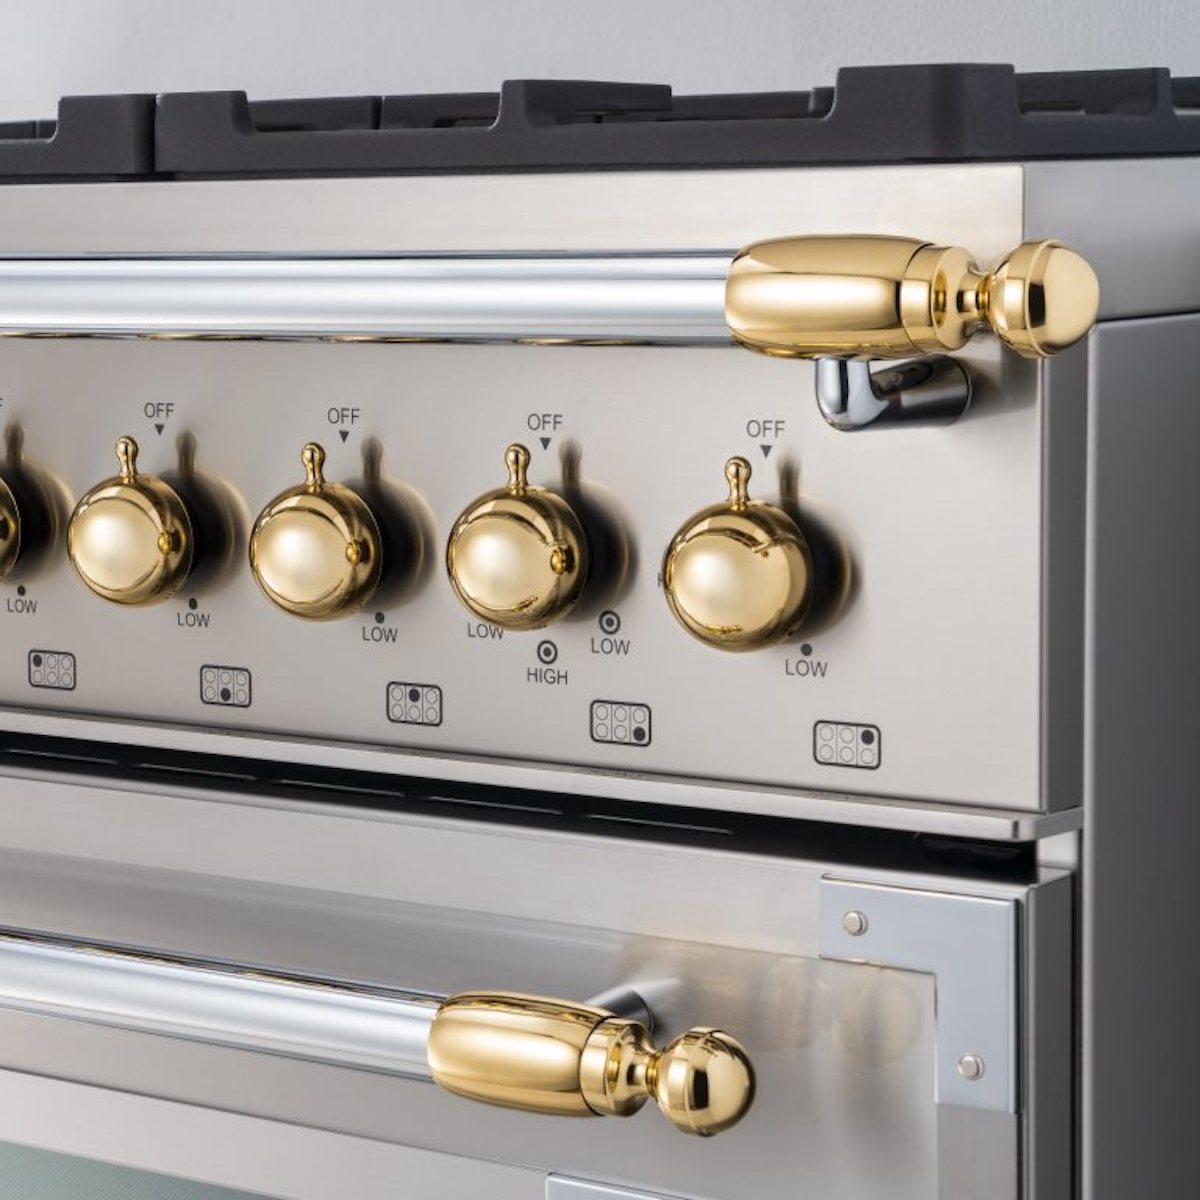 Close up view of gold knobs and handle finials on a stainless steel Bertazzoni range.